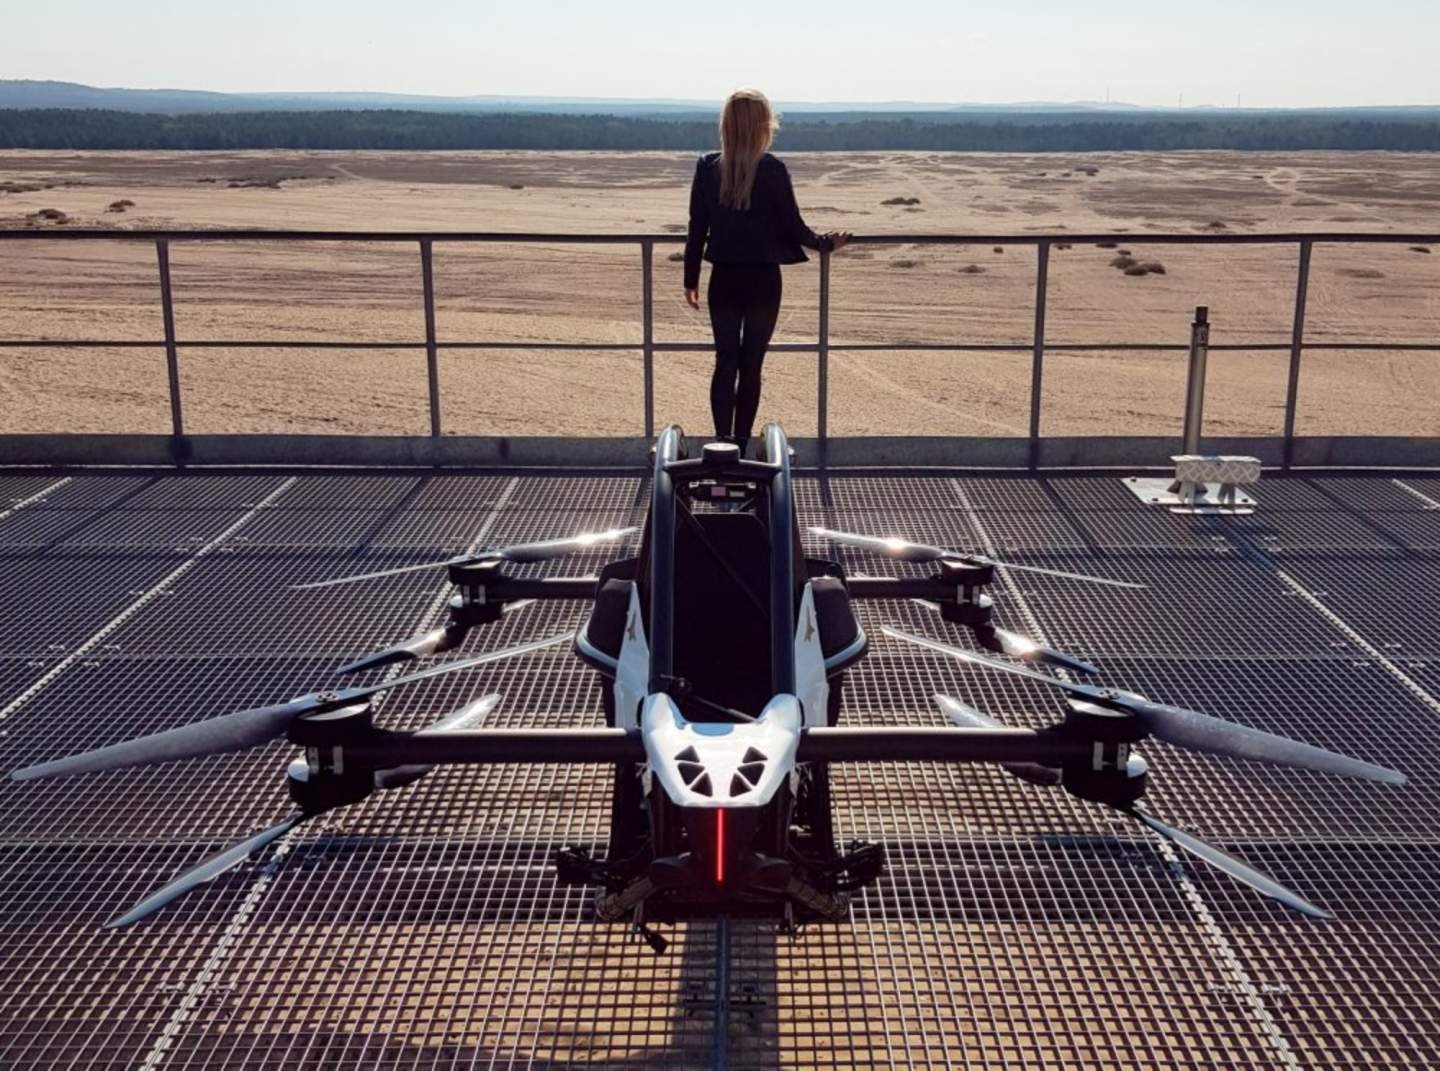 Jetson ONE eVTOL enters commercial production in 2022